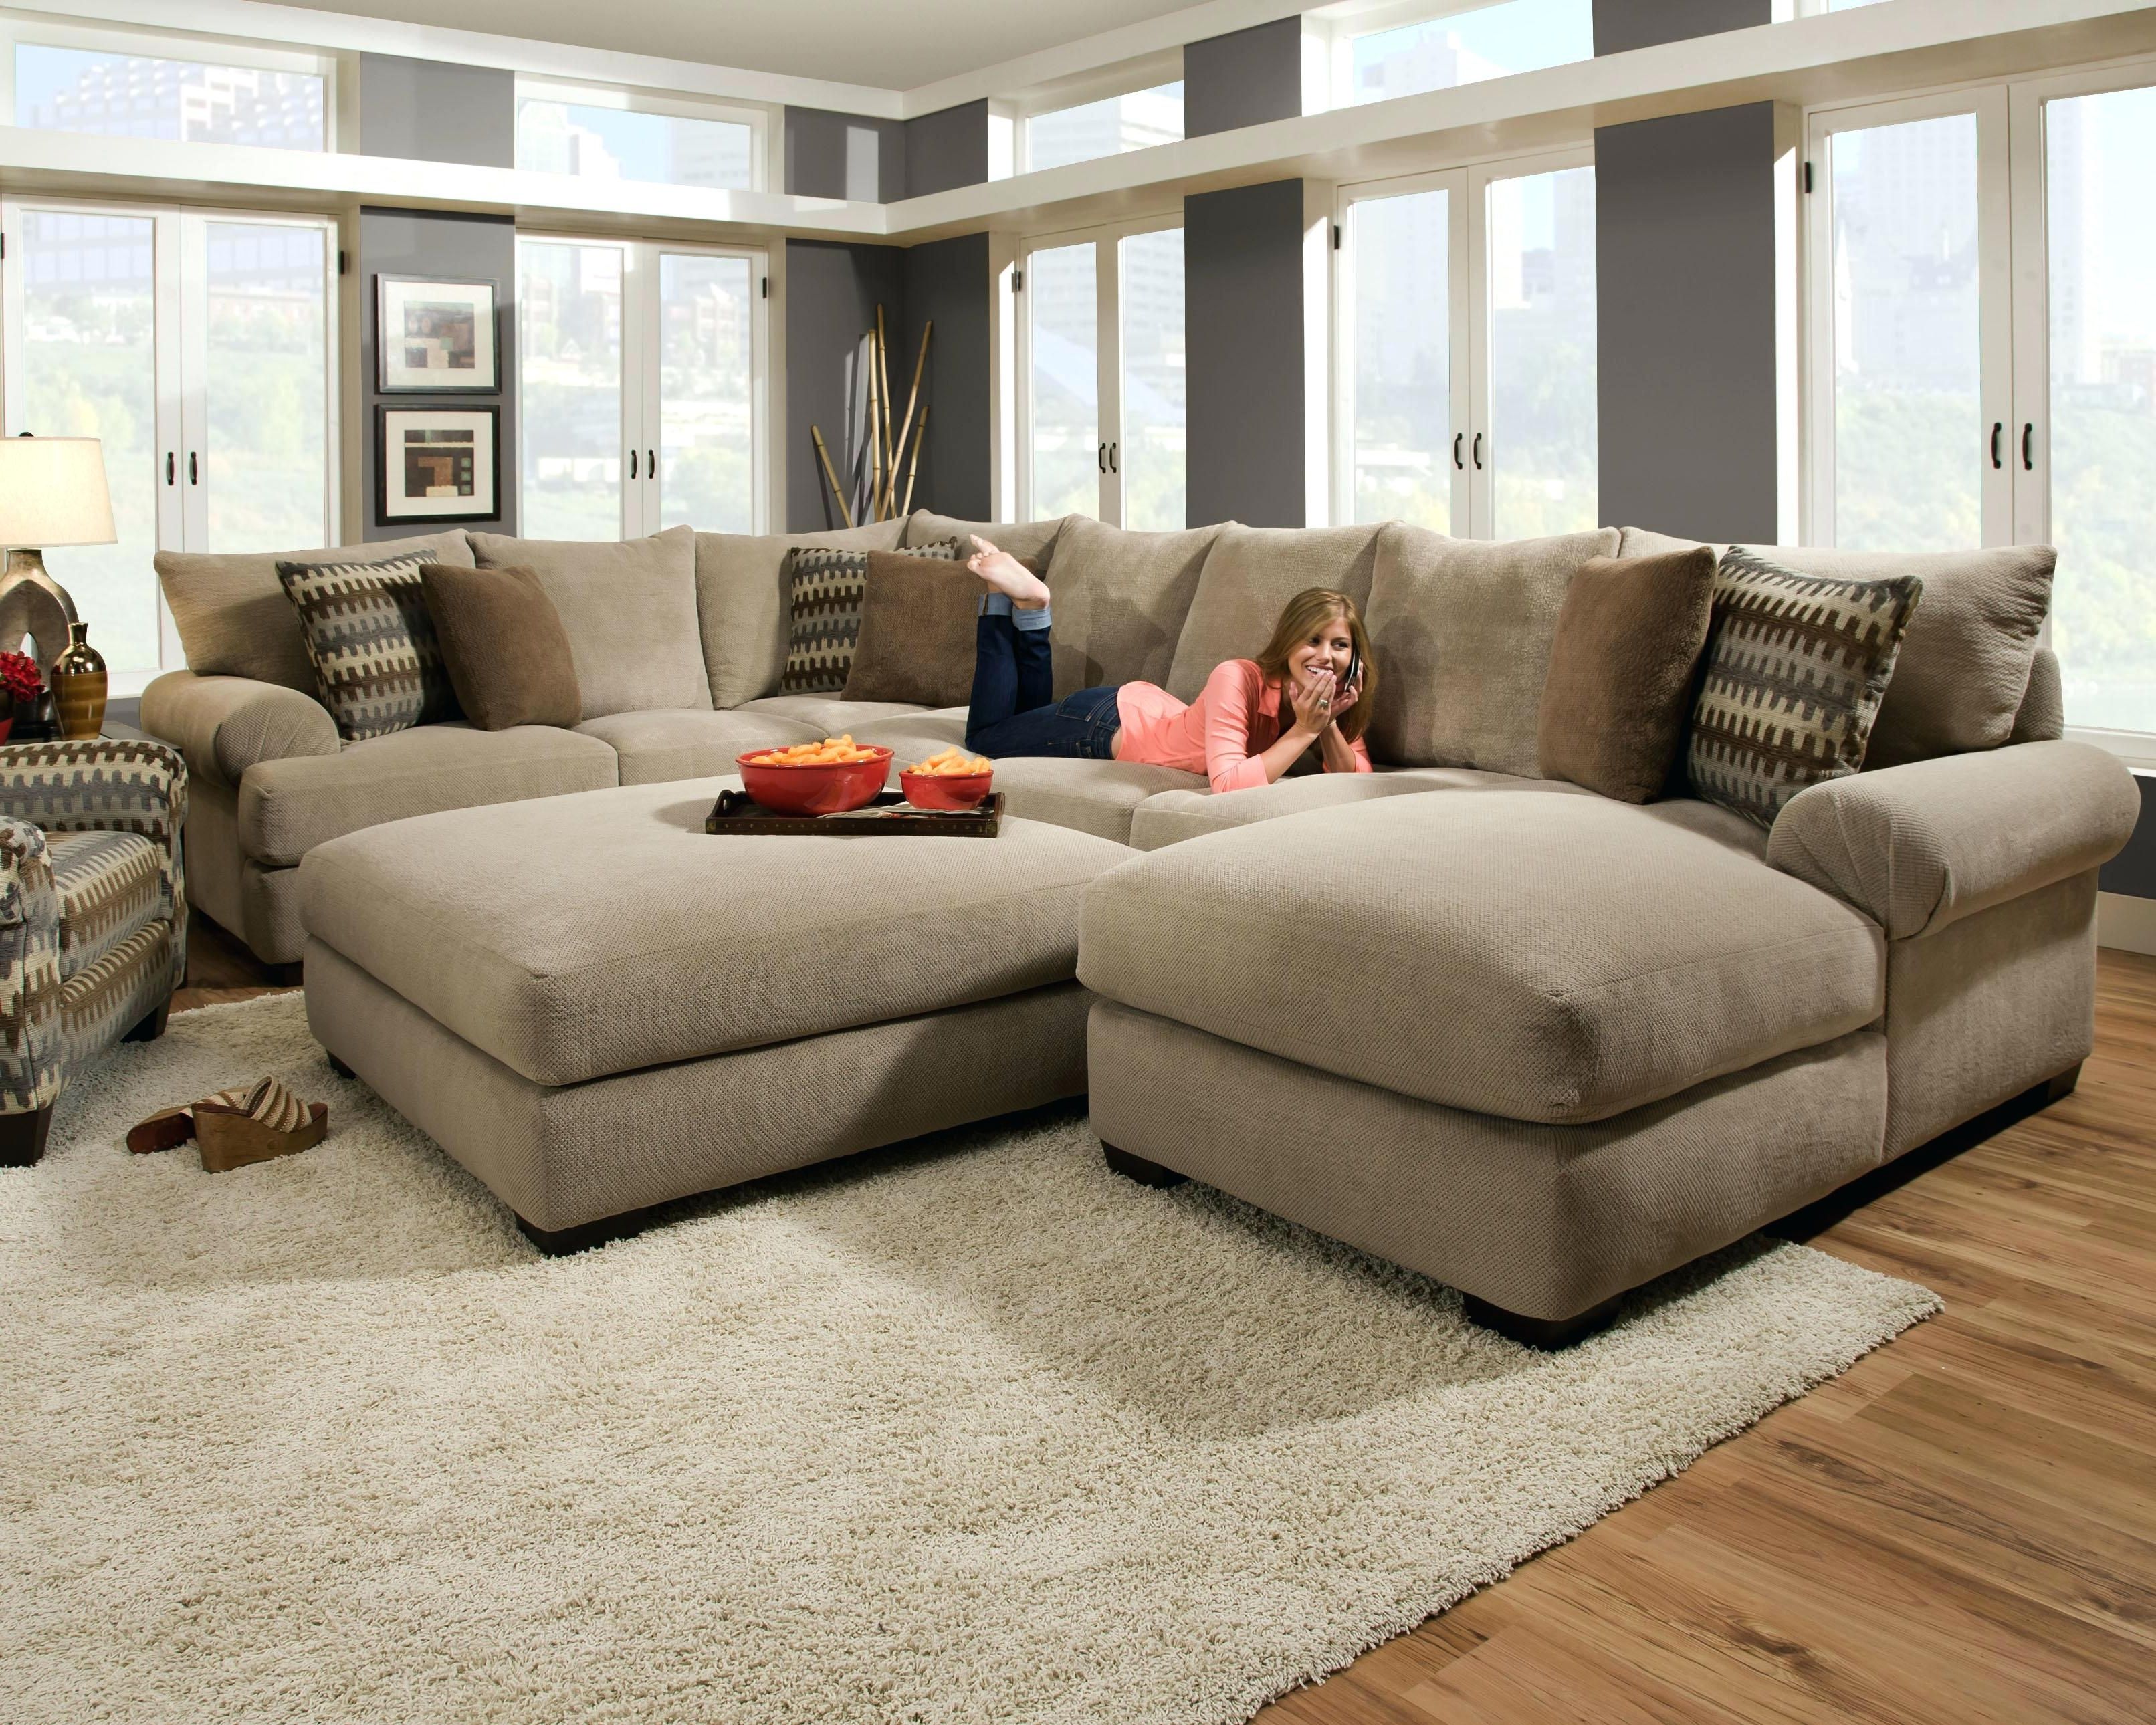 Living Room : Pillows For Sectional Sofa Large Decorative Pillows With Best And Newest Deep Seating Sectional Sofas (View 5 of 20)